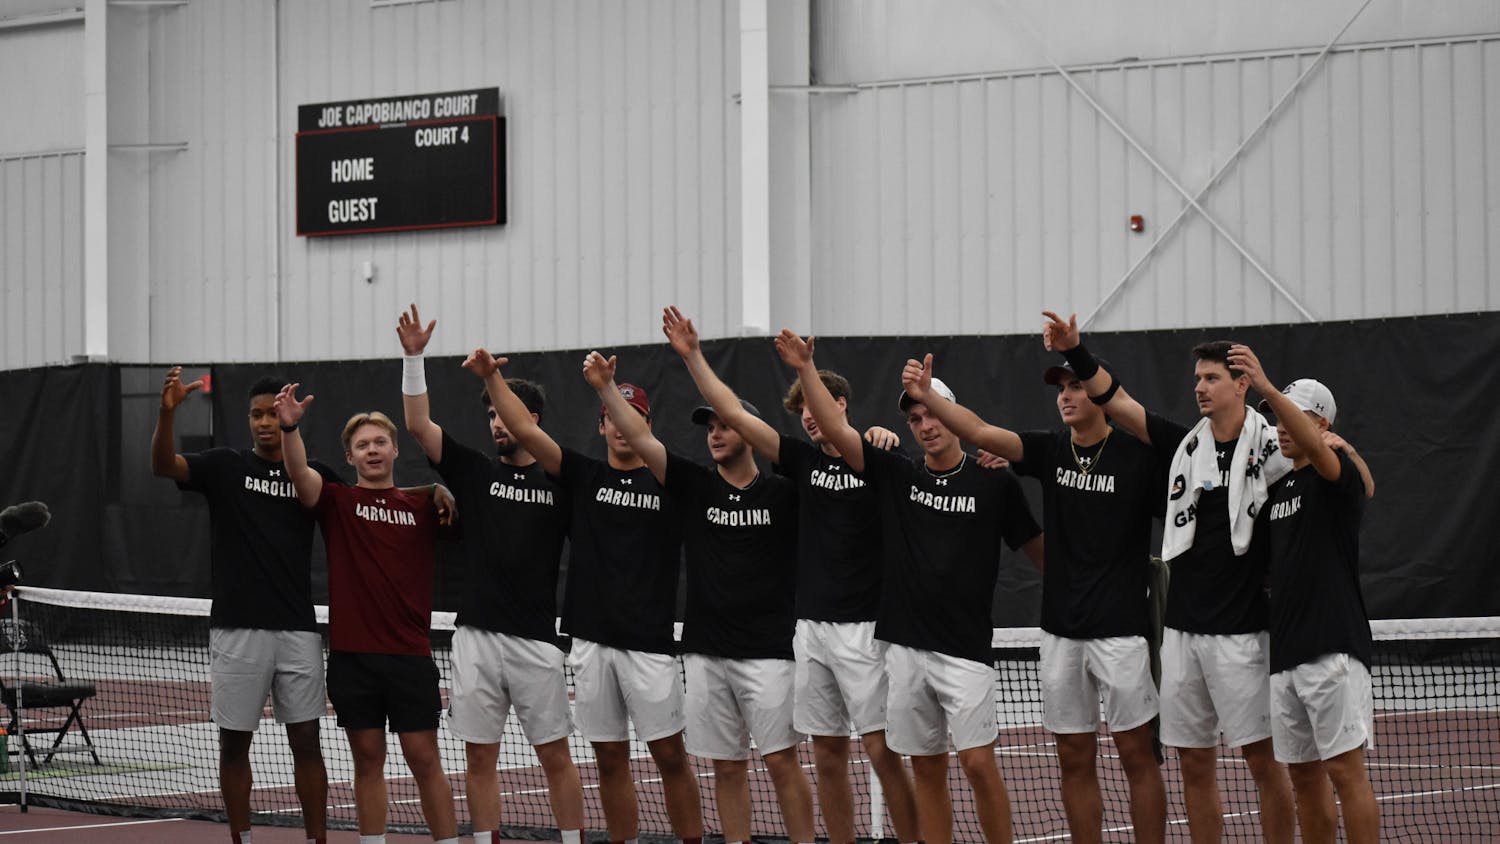 The South Carolina men’s tennis team stand together with an arm raised as the university's alma mater plays on day two of the ITA Kickoff Weekend event at the Carolina Indoor Tennis Center on Jan. 29, 2023. The South Carolina Gamecocks beat N.C. State 4-0, making it the winner of the ITA tournament.&nbsp;